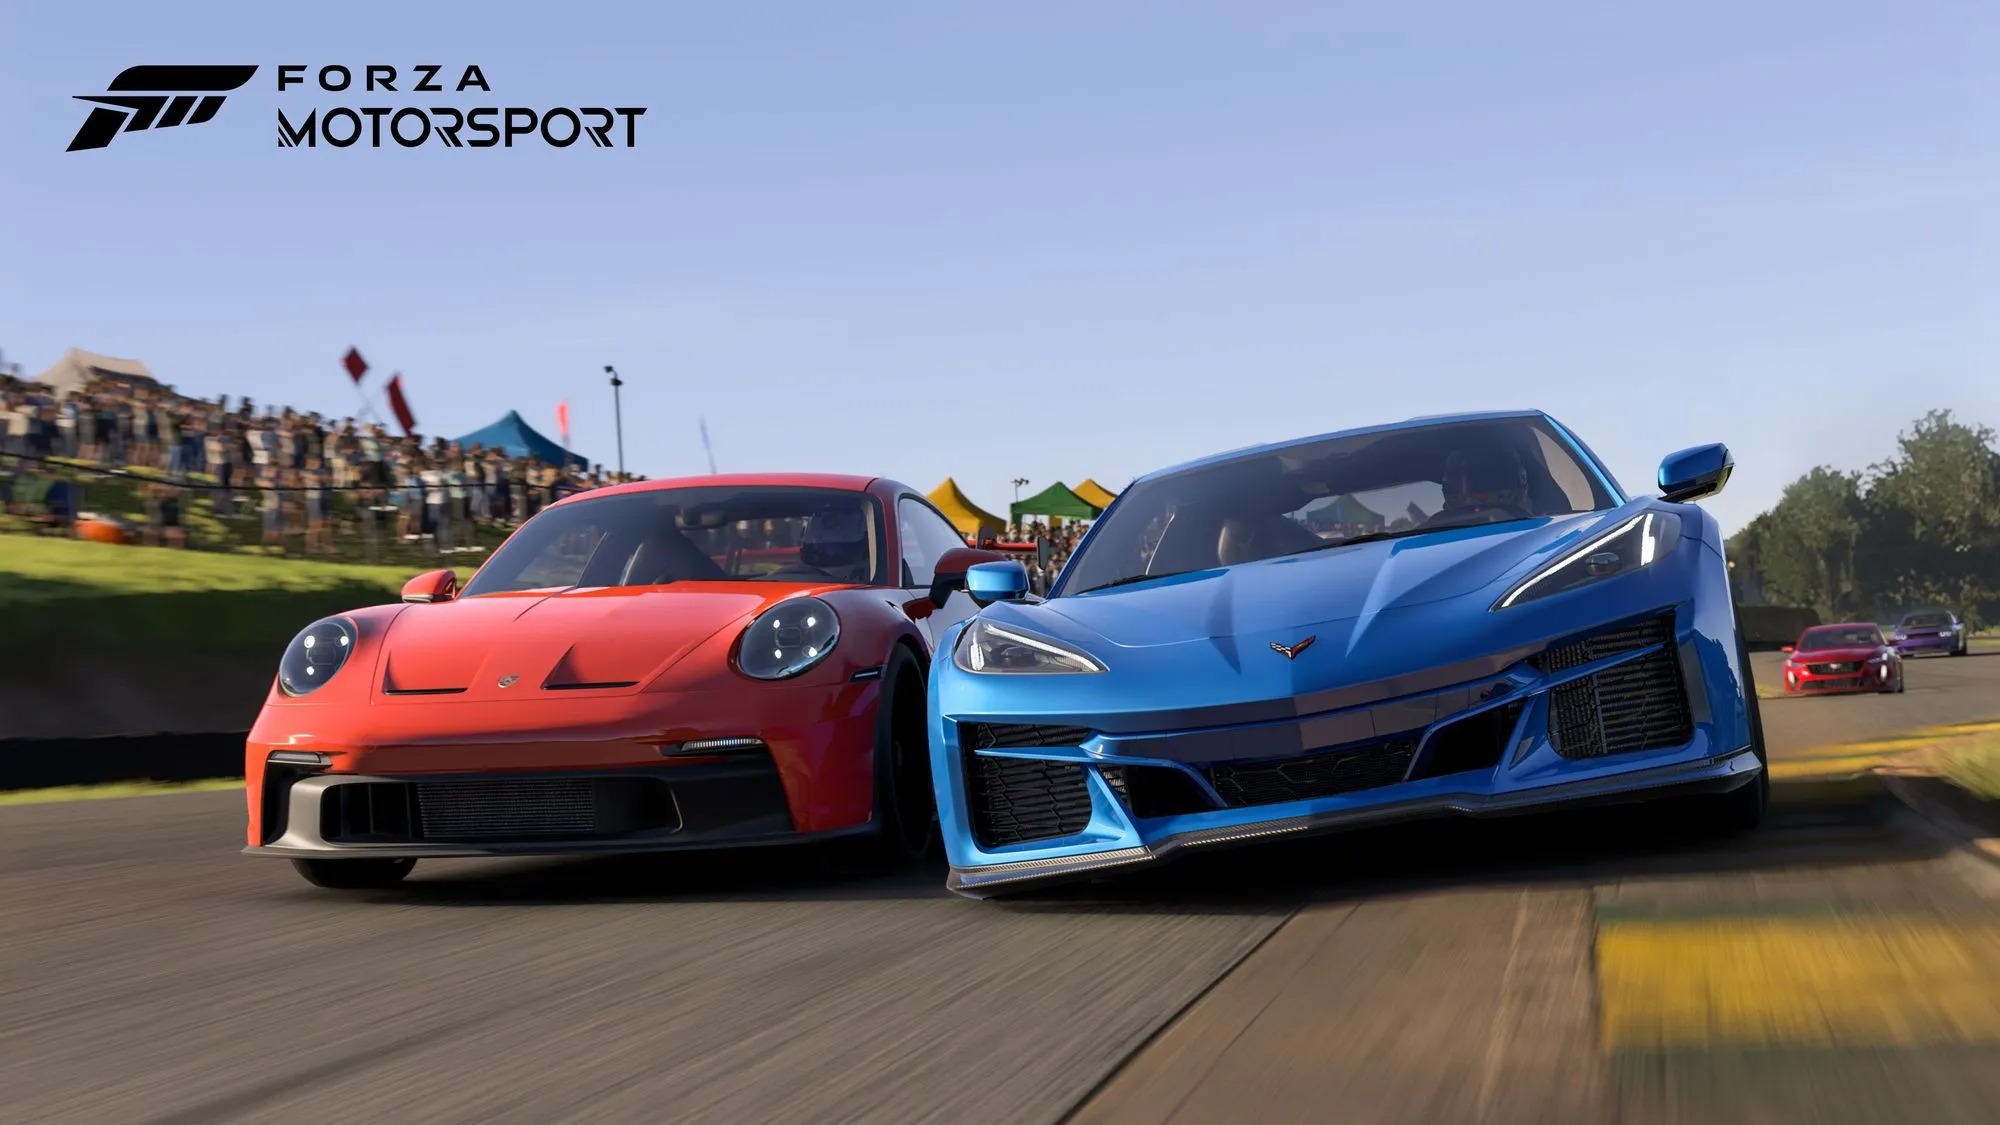 Forza Motorsport PC Requirements Revealed, SSD and 130 GB Storage Space Required